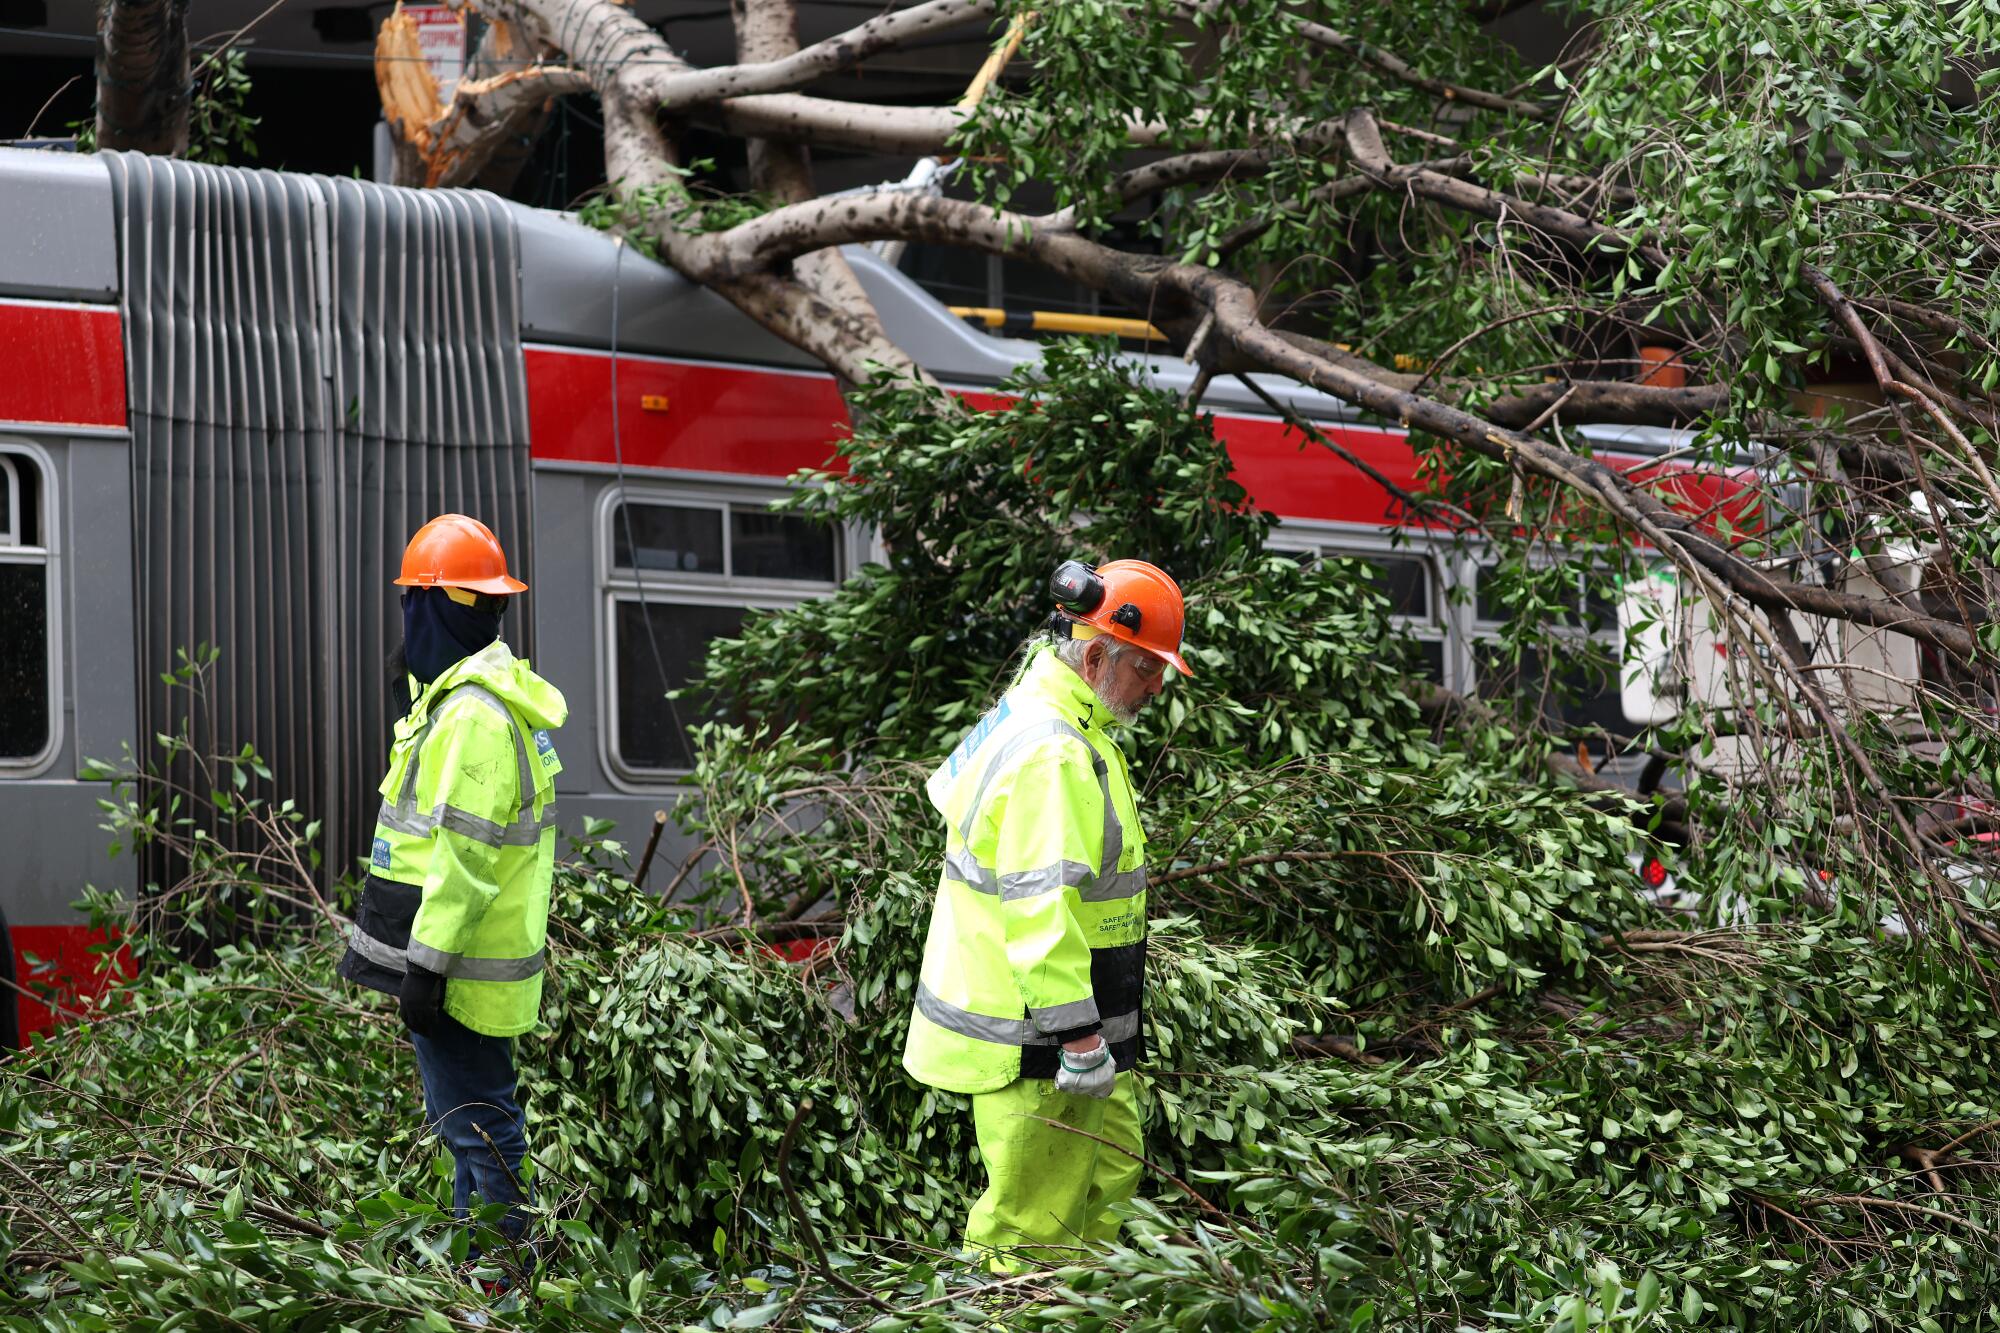 San Francisco Department of Public Works workers cut up a tree that fell on a SF MUNI bus on Wednesday after a storm